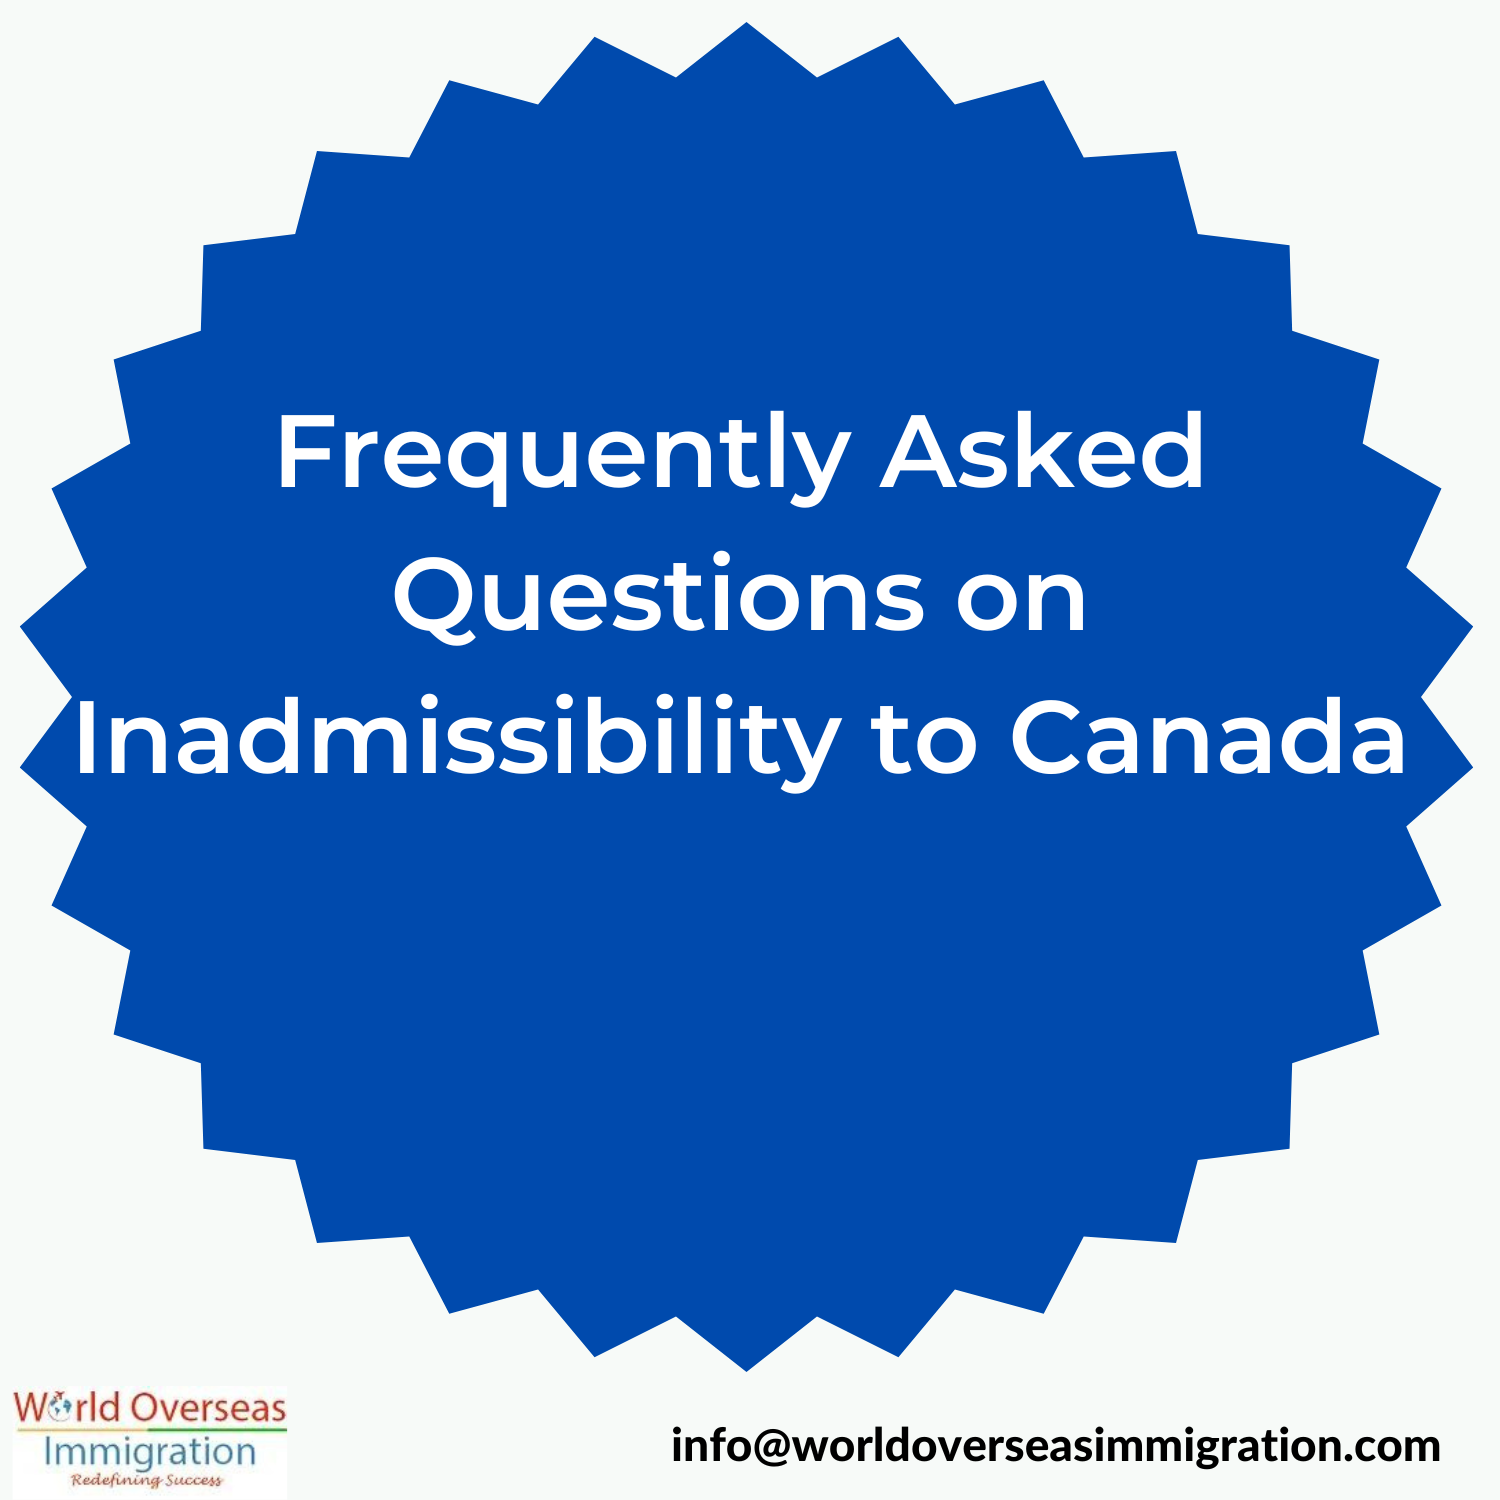 Frequently Asked Questions on Inadmissibility to Canada